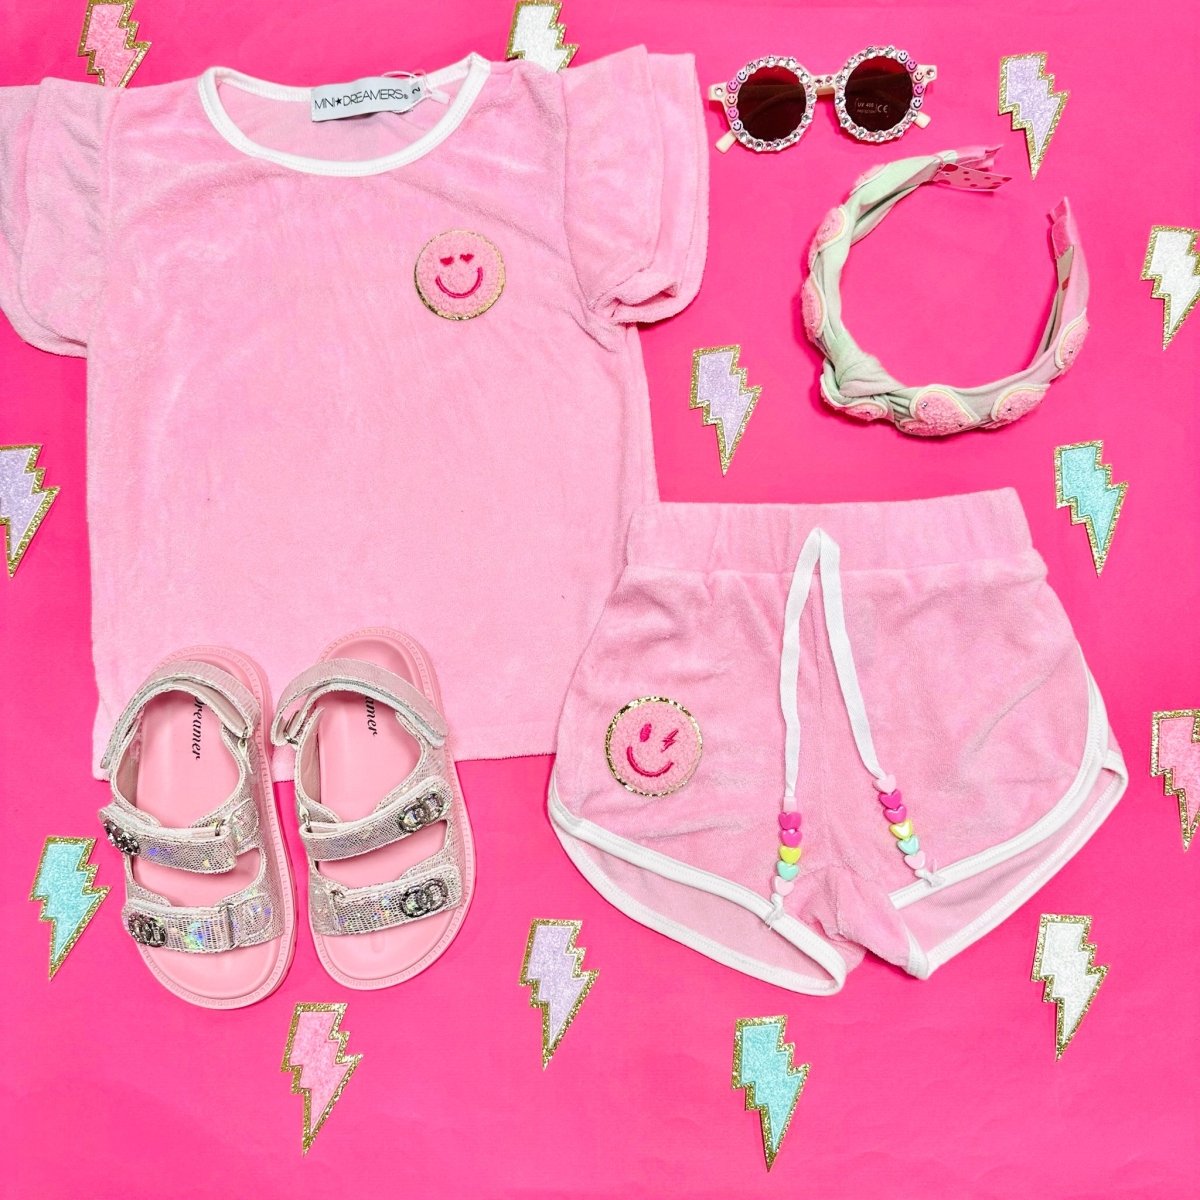 CALI SMILEY TERRY RUFFLE TOP AND SHORTS SET - MINI DREAMERS